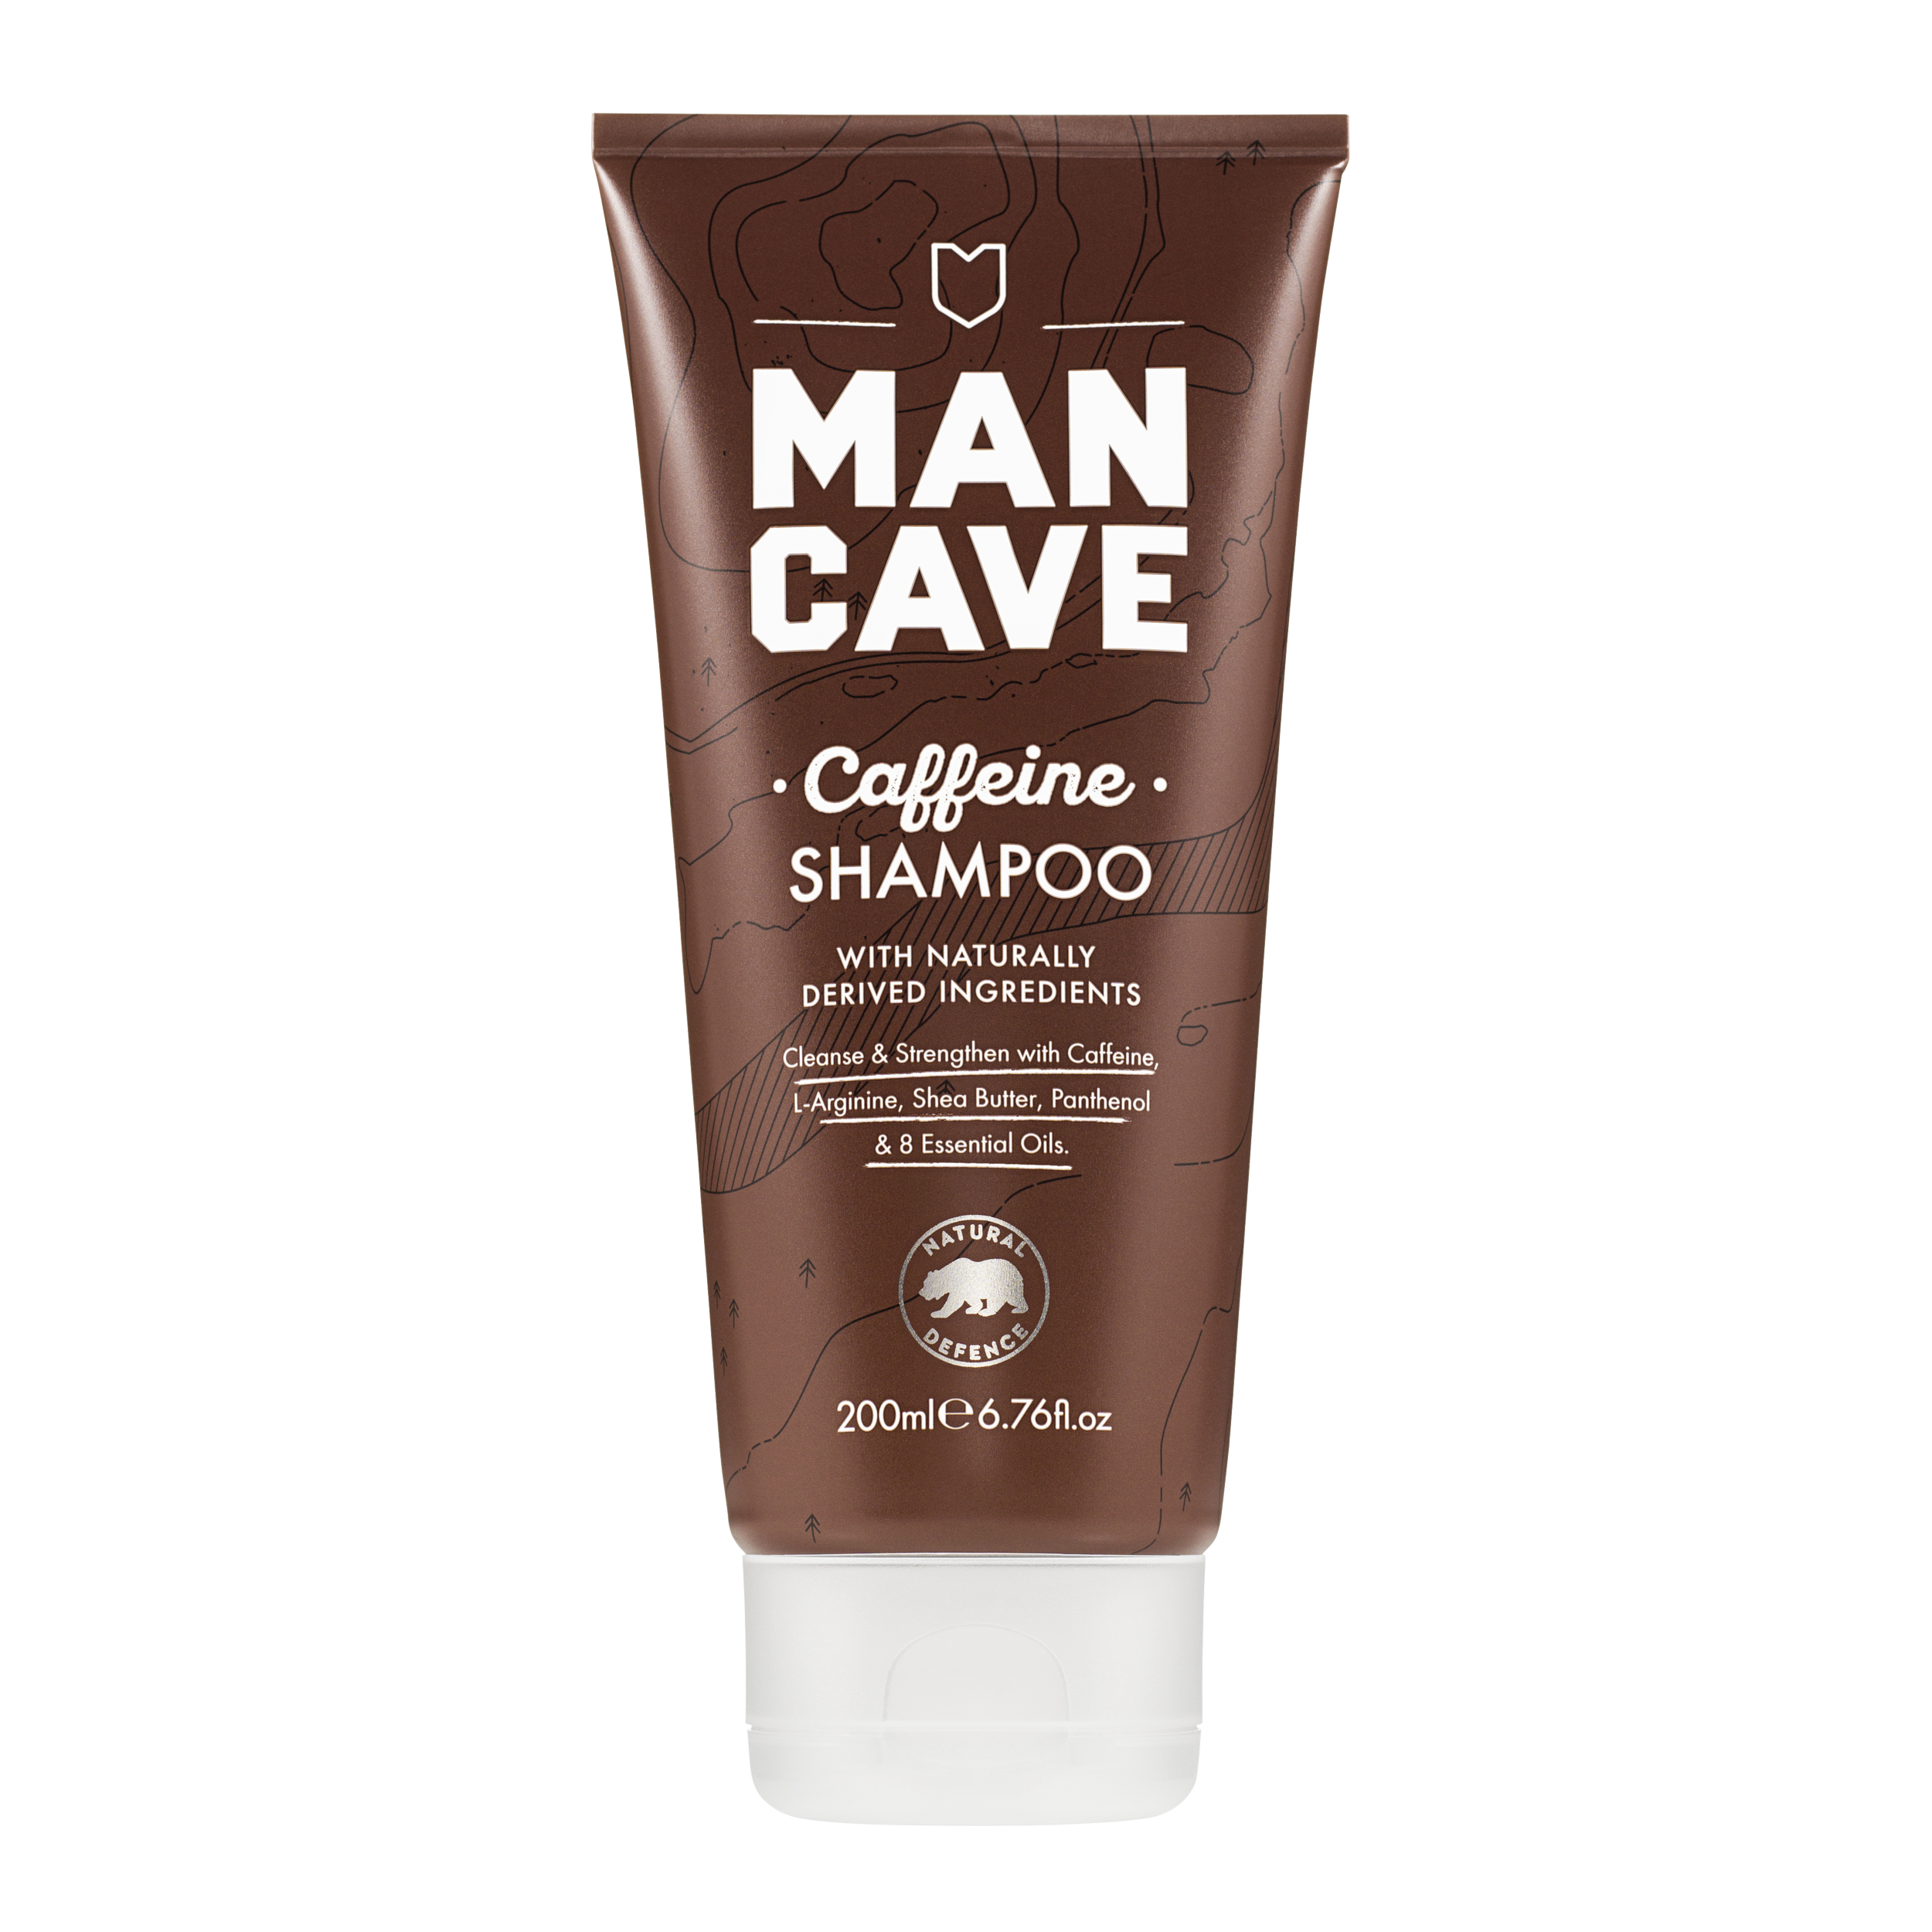 The ManCave caffeine shampoo  100% recyclable brown tube. Cruelty free certified and vegan friendly.